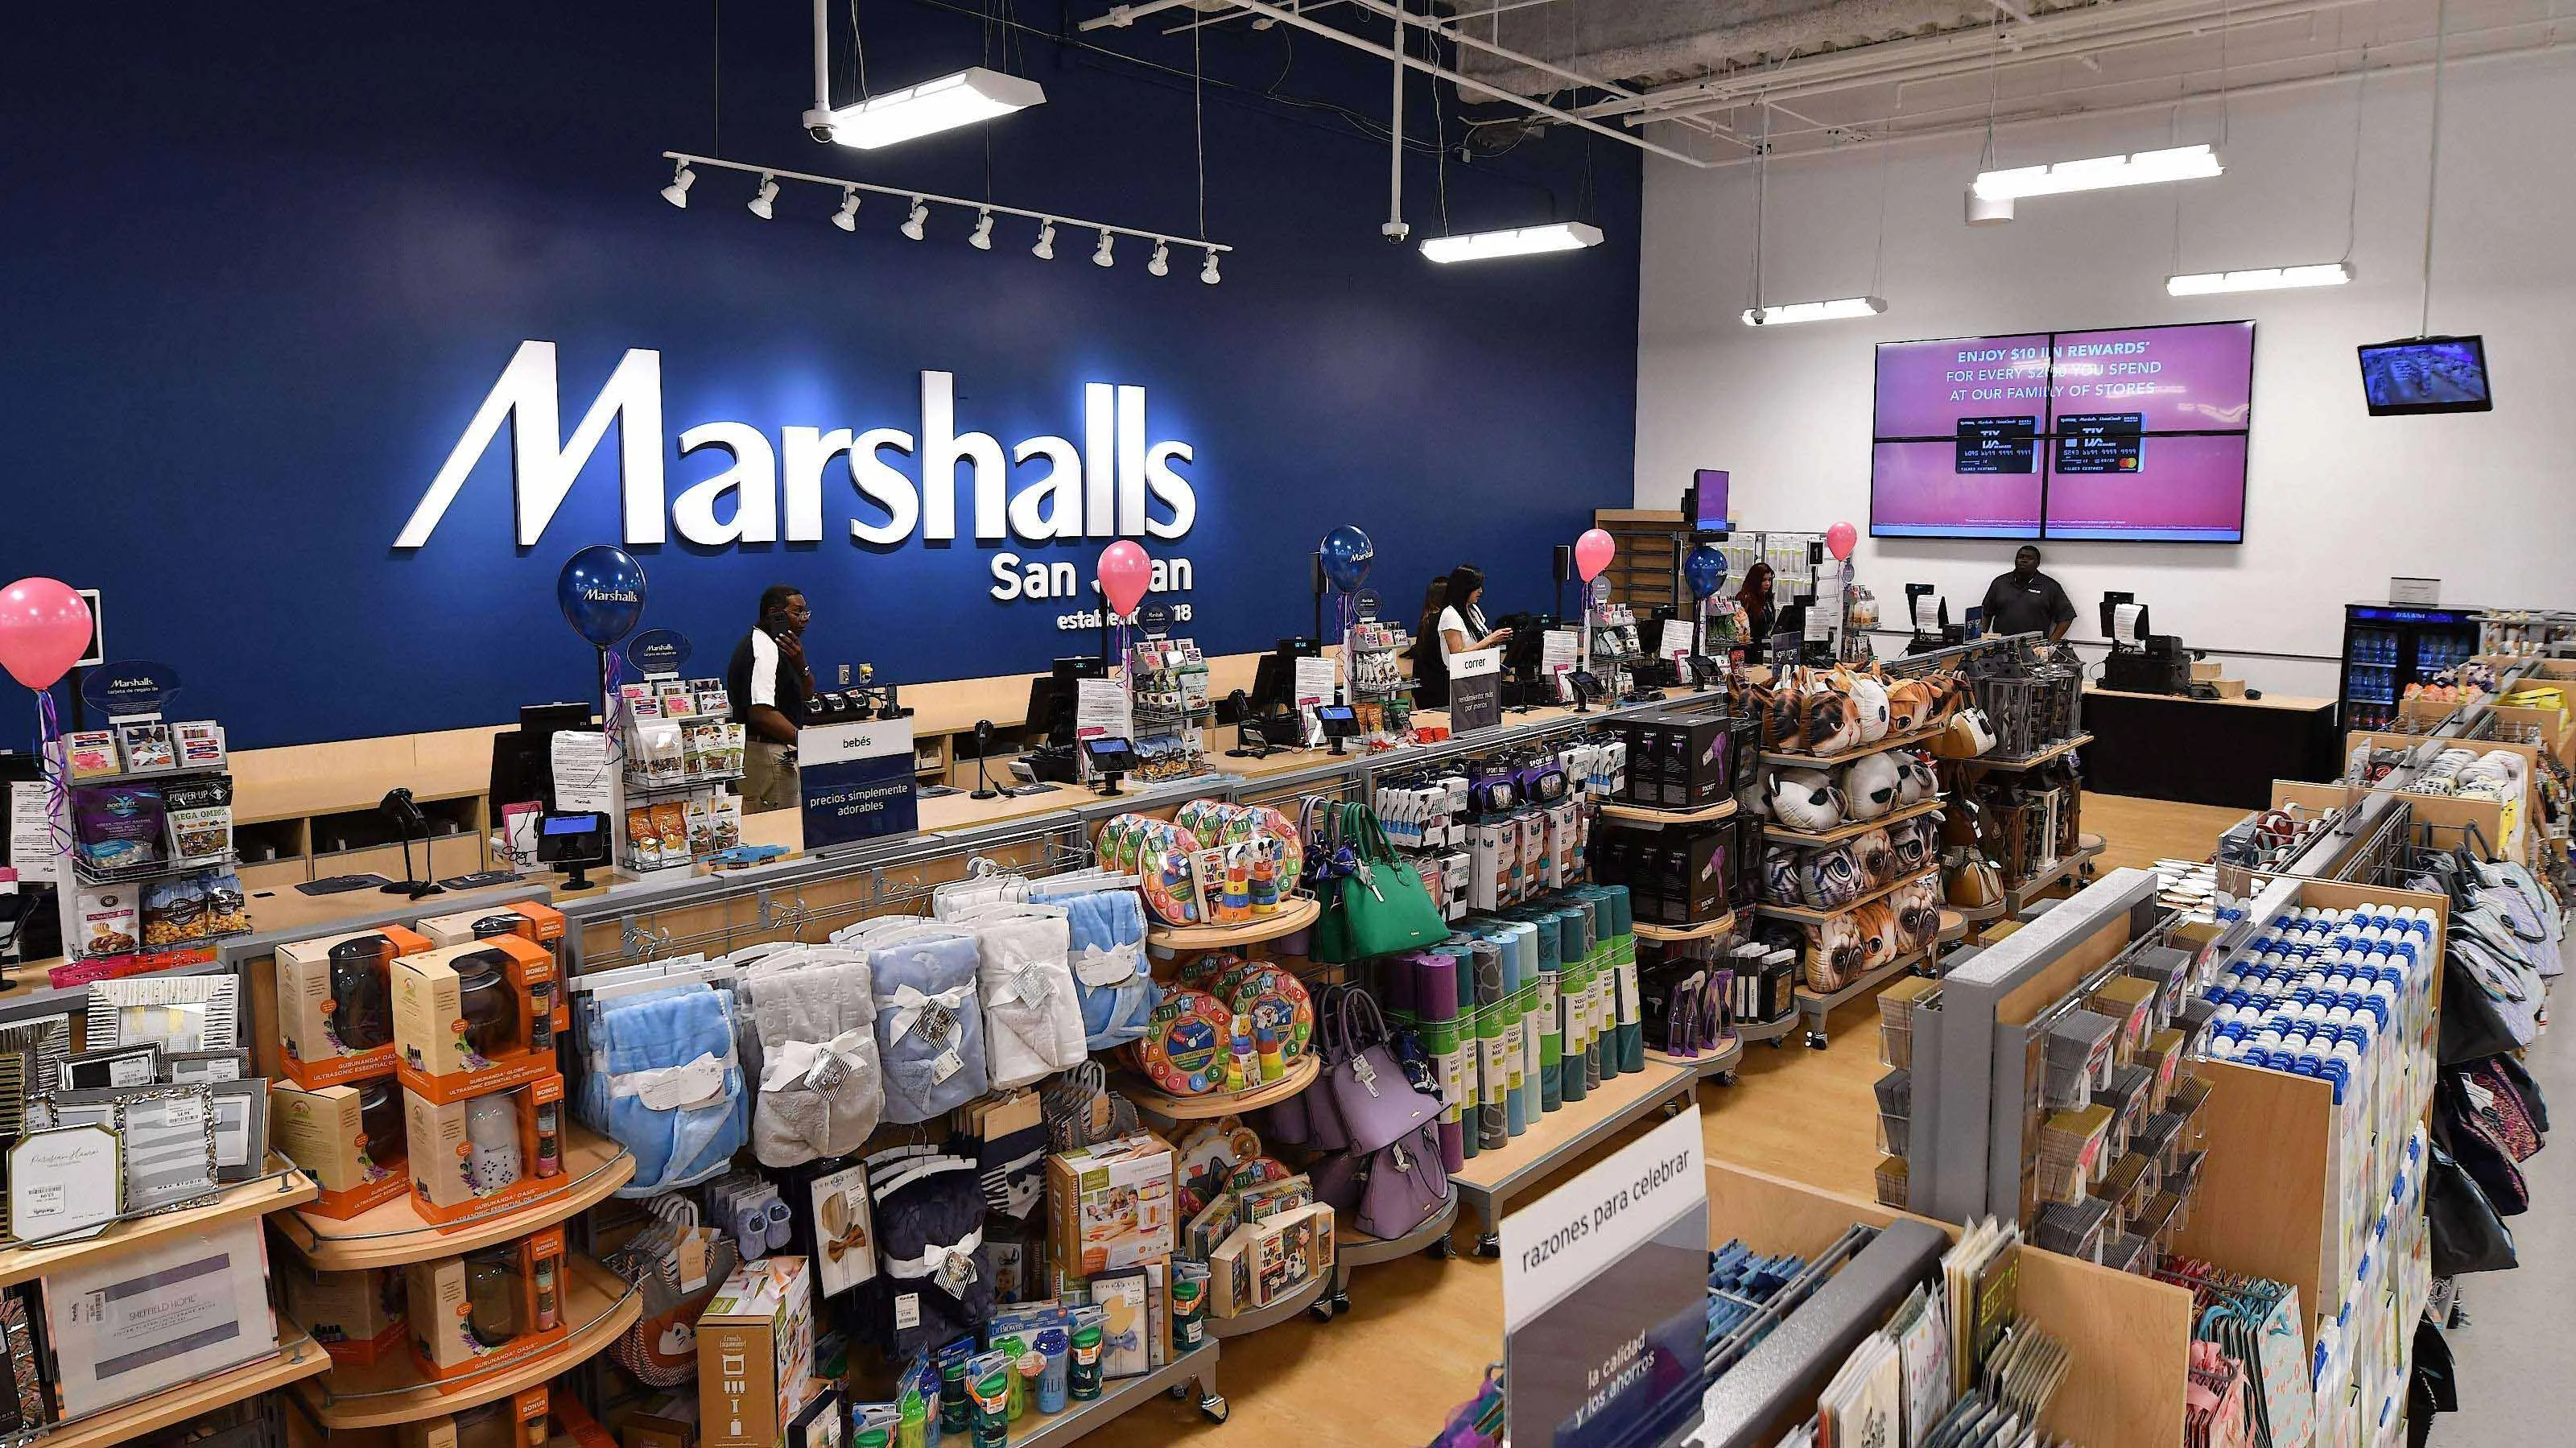 Marshalls in Puerto Rico, caribbean | Handbags,Shoes,Accessories,Clothes,Handicrafts,Home Decor - Country Helper